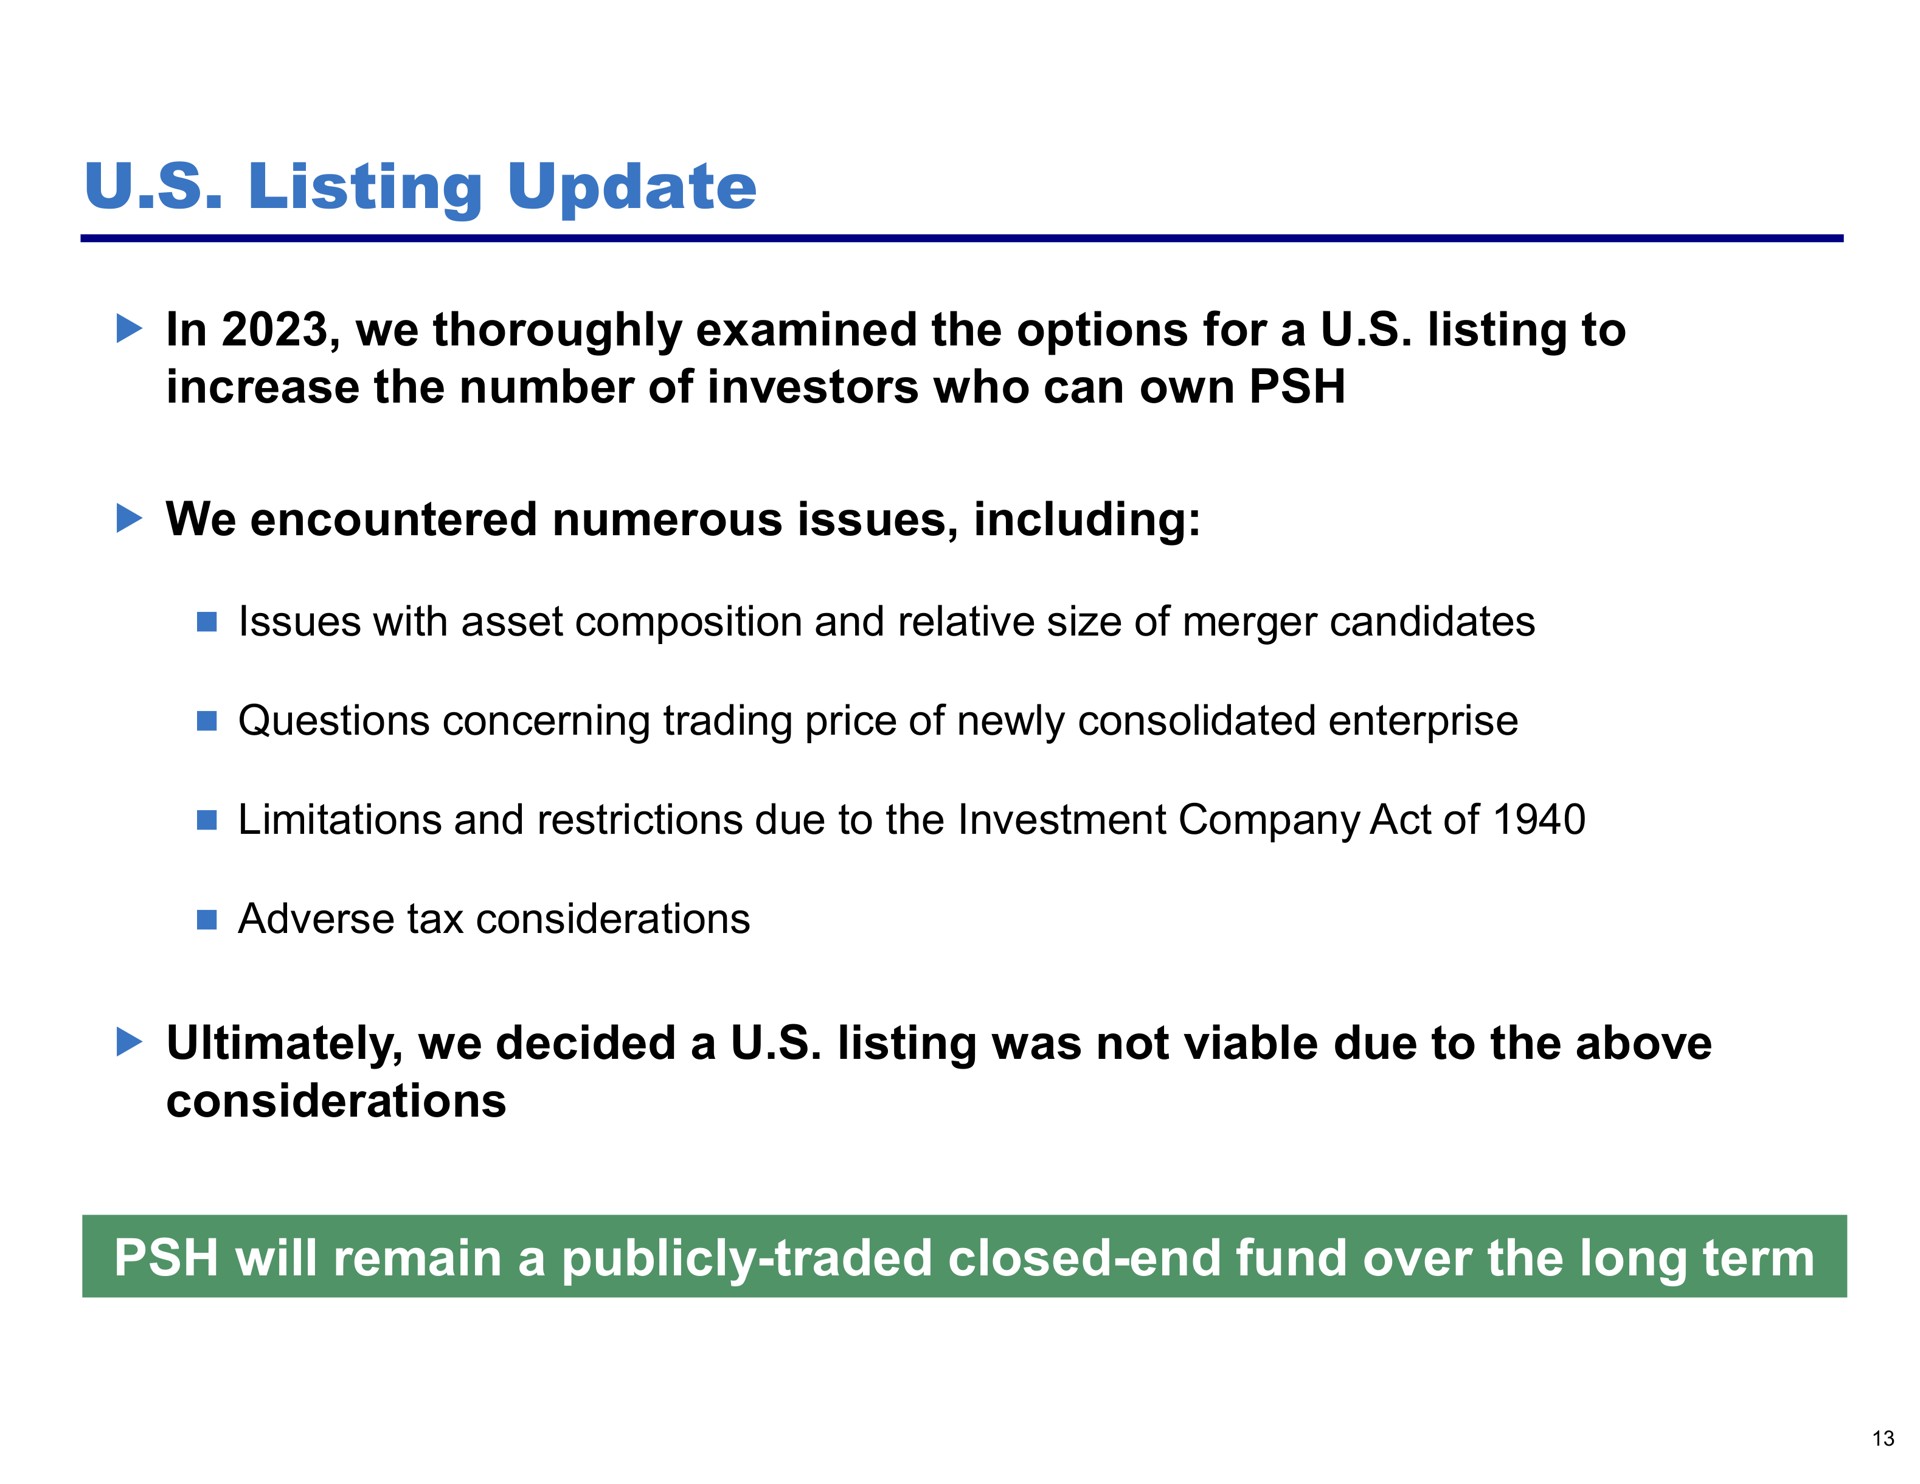 listing update in we thoroughly examined the options for a listing to increase the number of investors who can own we encountered numerous issues including ultimately we decided a listing was not viable due to the above considerations will remain a publicly traded closed end fund over the long term | Pershing Square